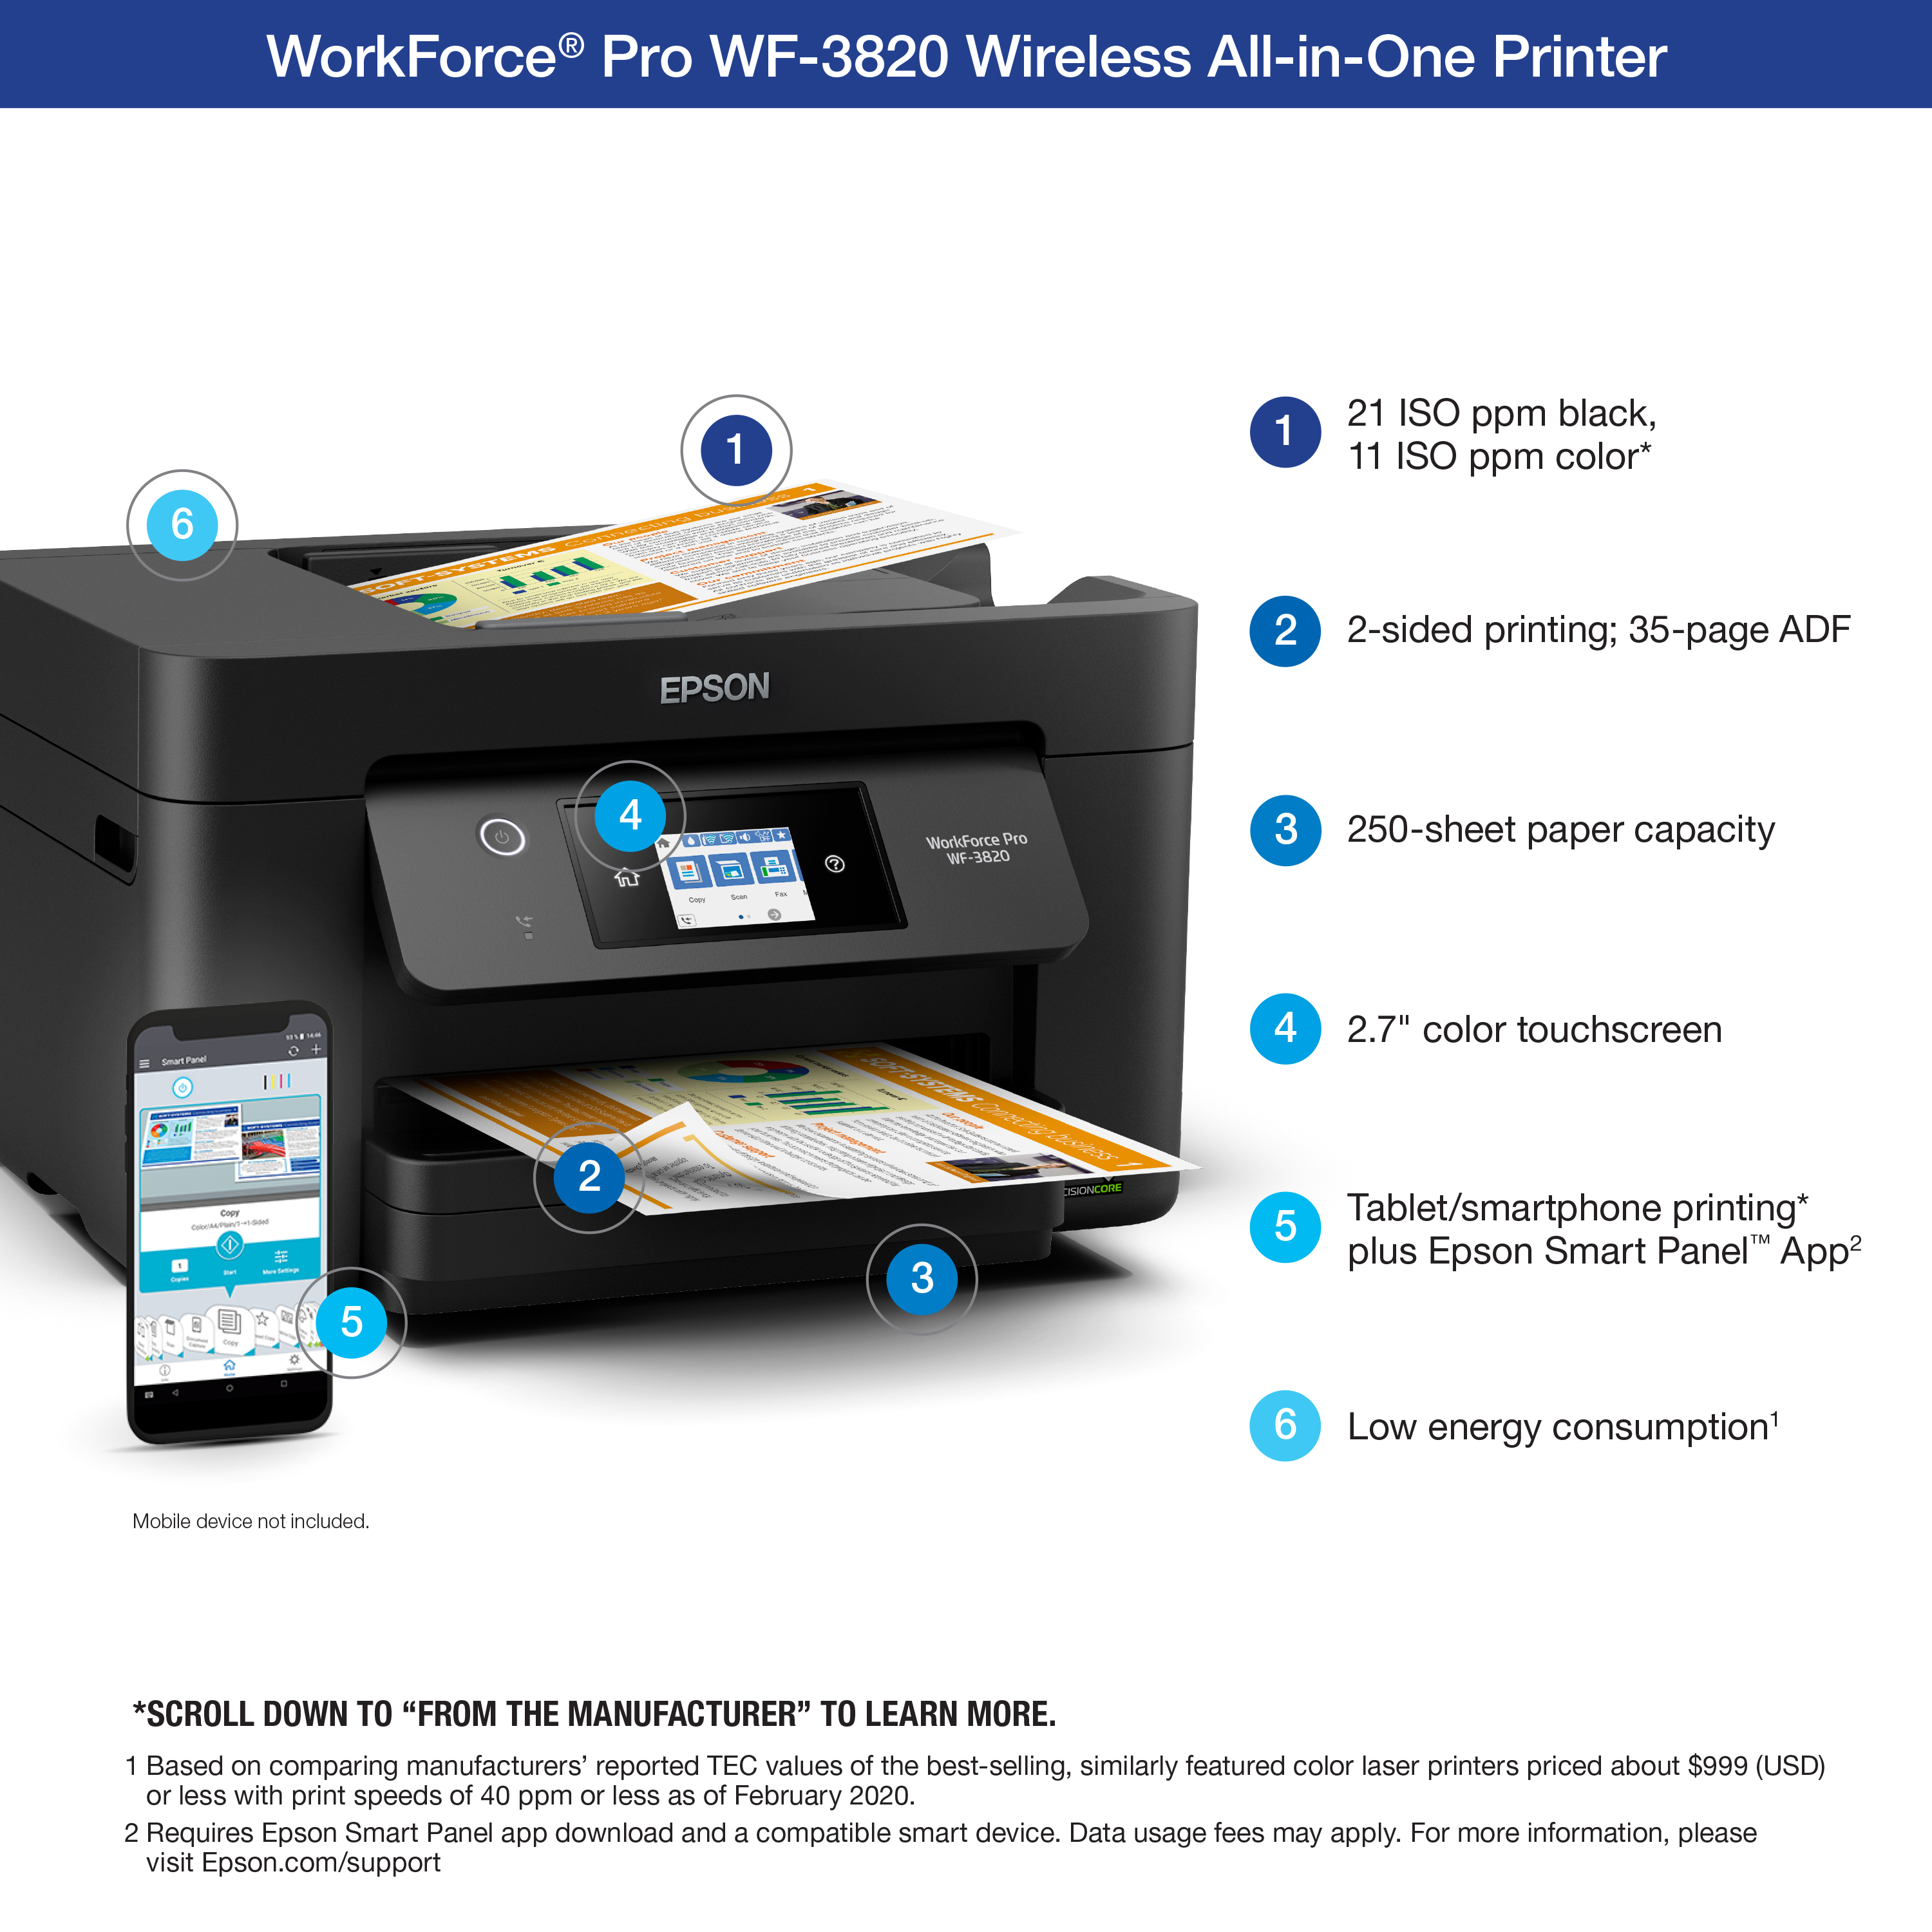 Epson(r) Workforce(r) Pro WF-3820 Wireless Color Inkjet All-in-One Printer, Black Large - image 4 of 6